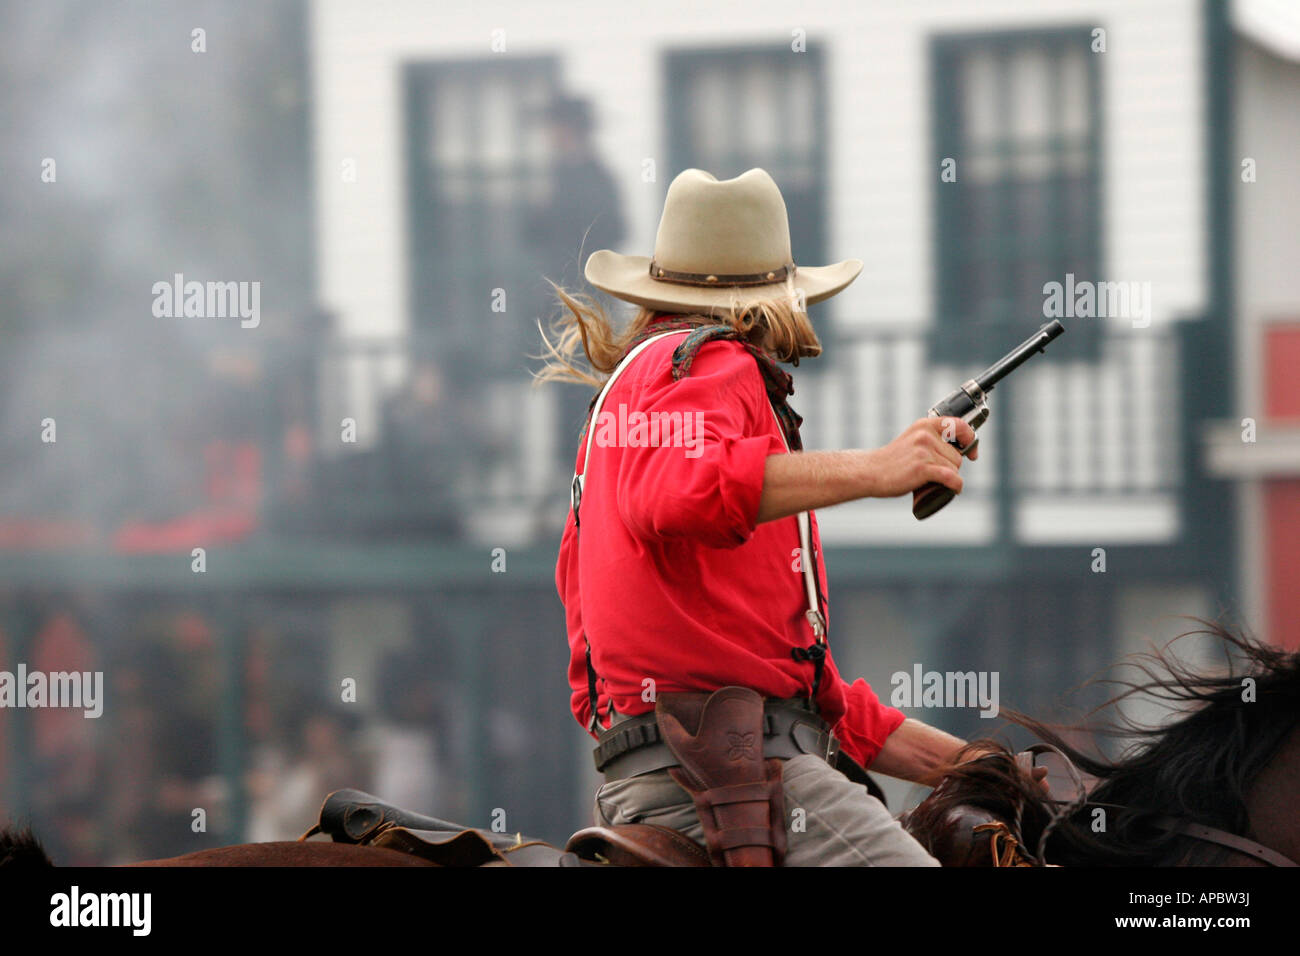 A armed cowboy with a gun riding horseback in a shootout with the towns people at a 1850s western reenactment Stock Photo